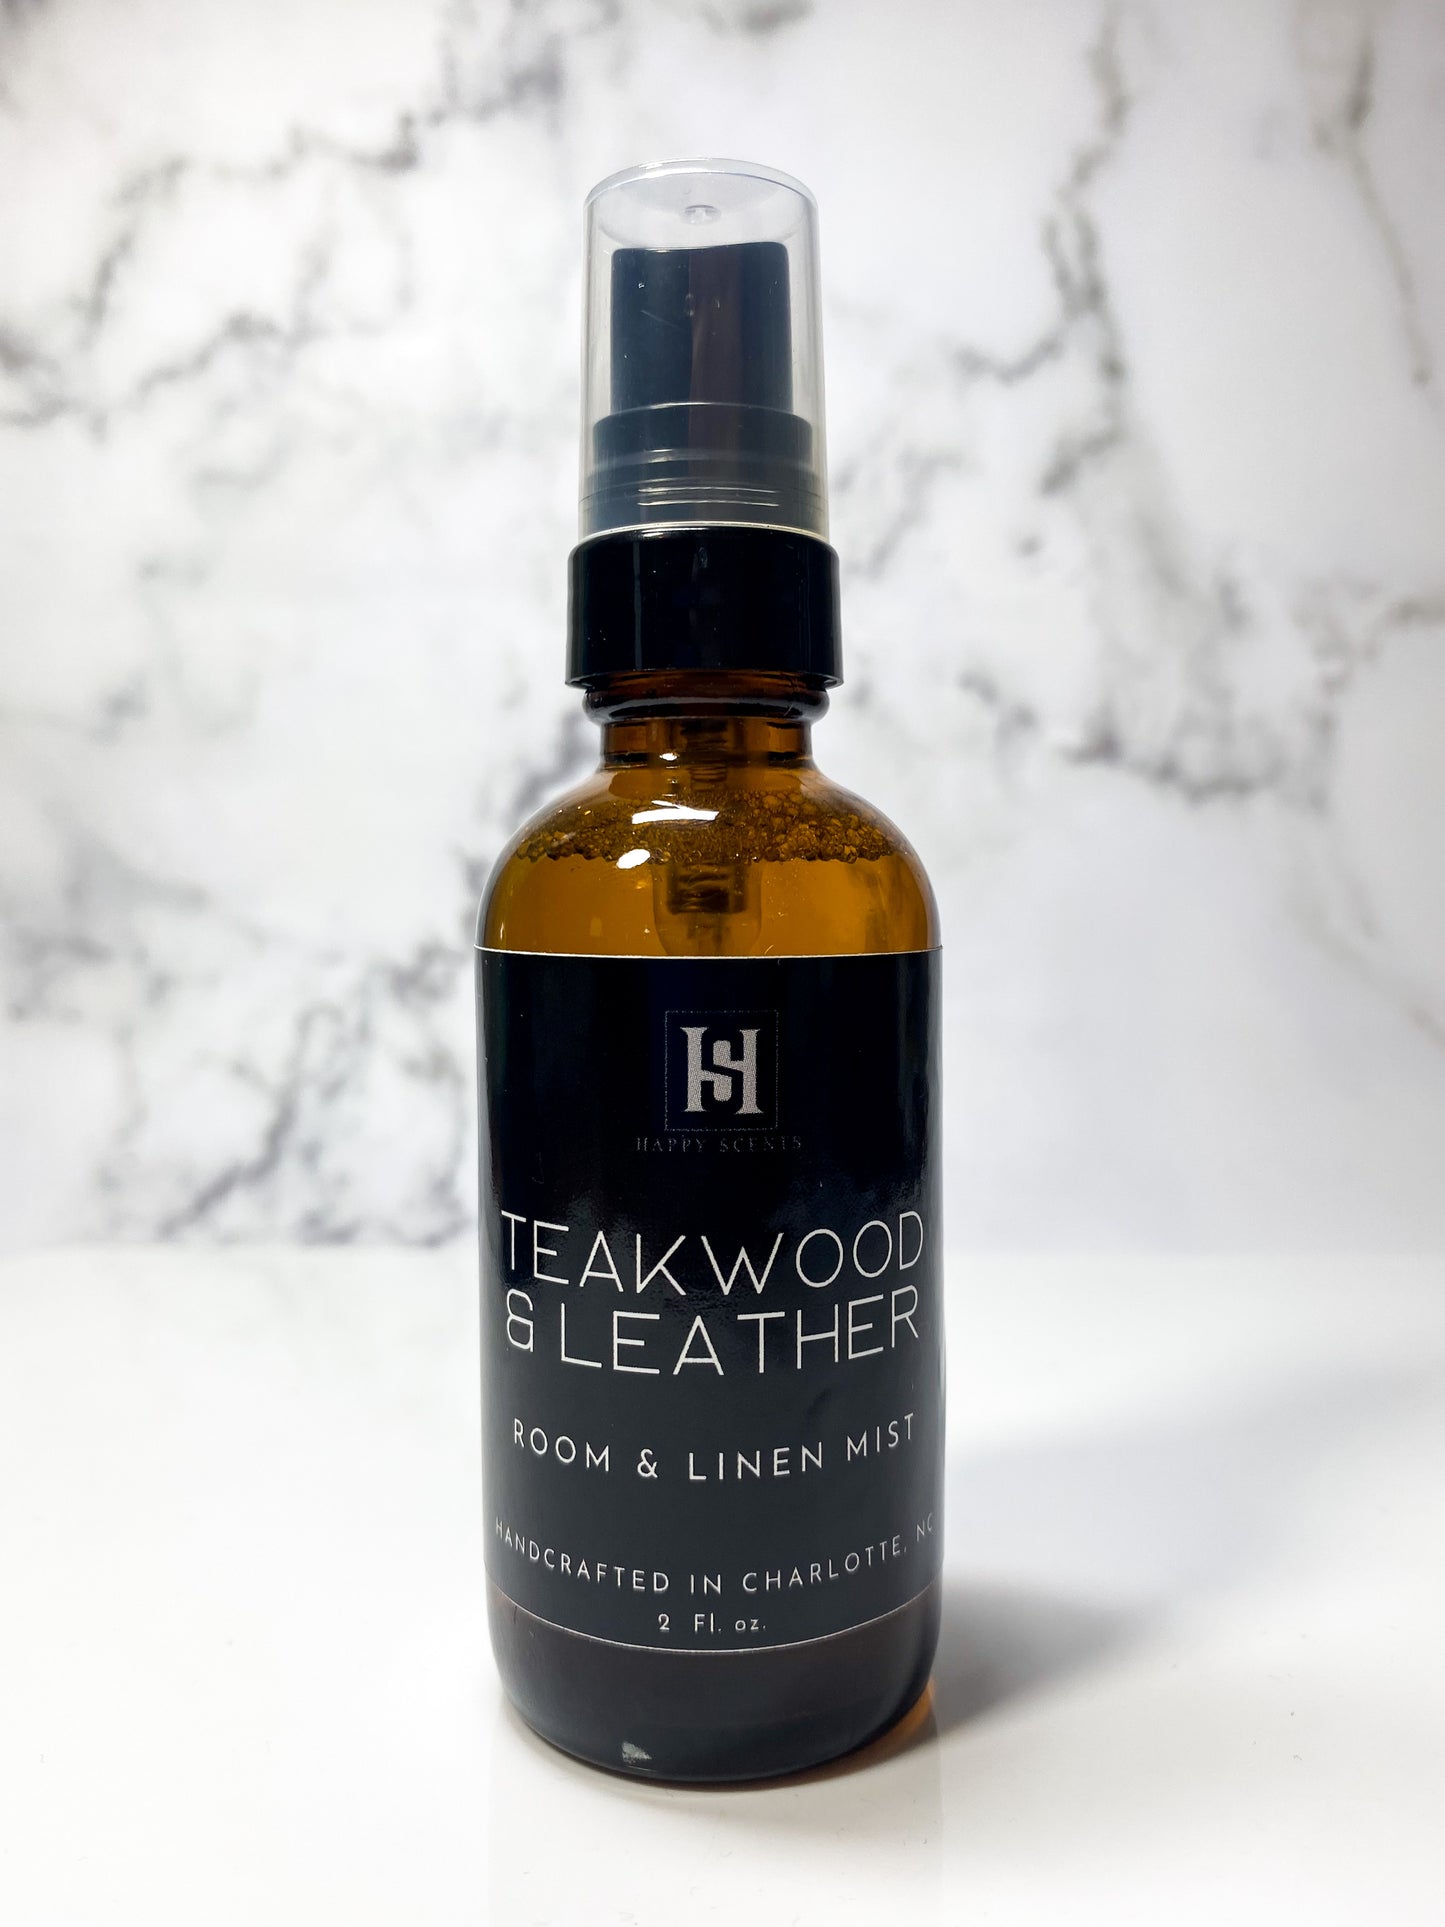 teakwood & leather room and linen mist by Happy Scents